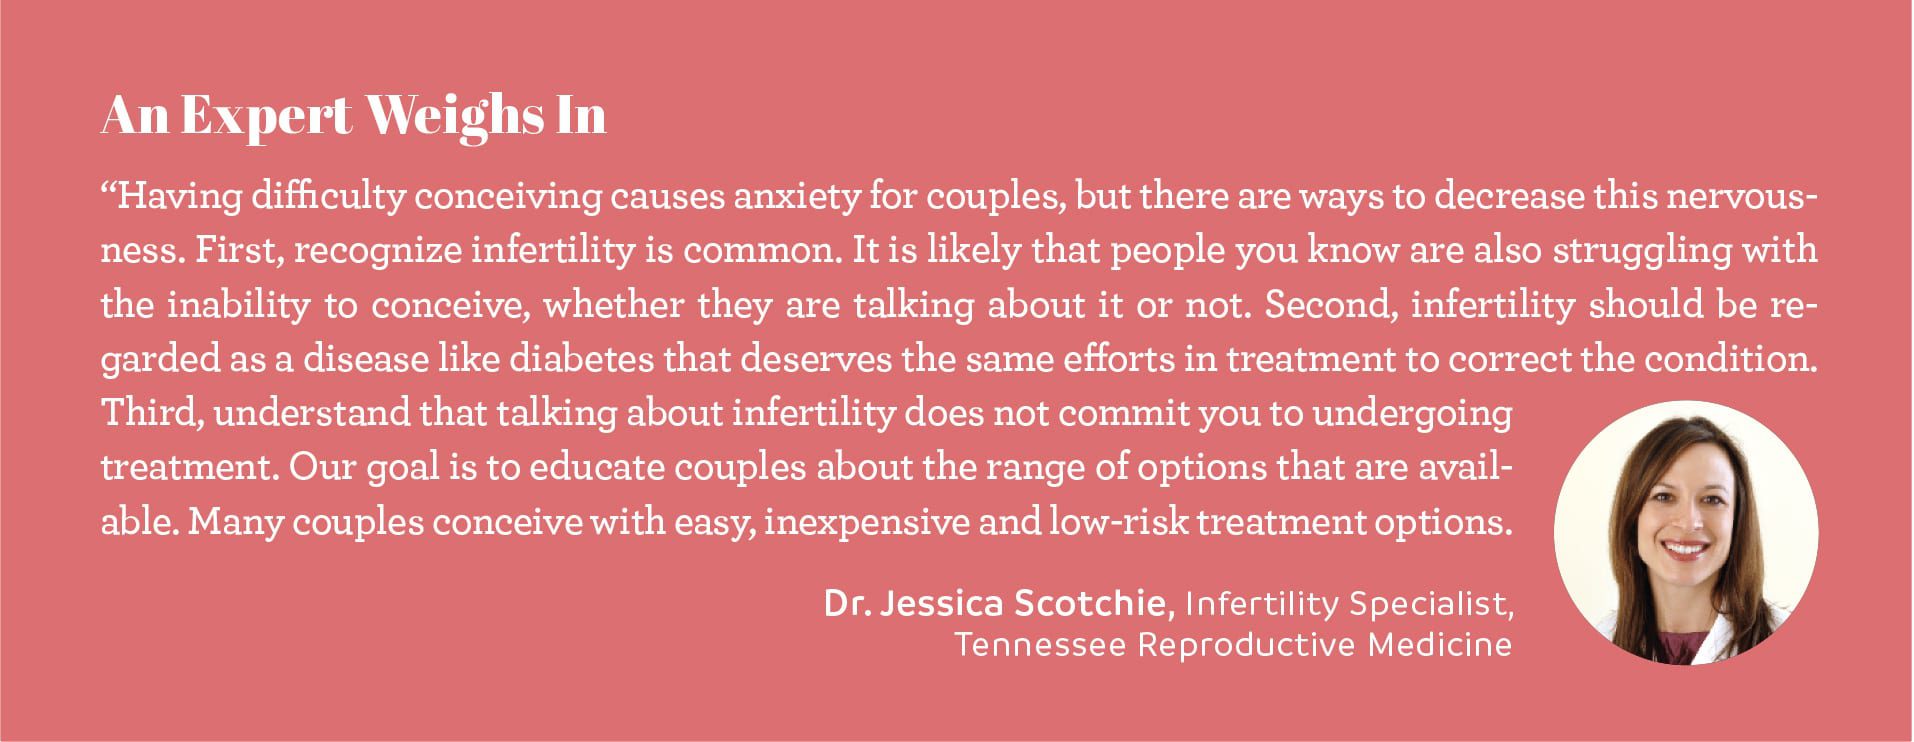 expert opinion chattanooga reproductive health doctor jessica scotchie infertility specialist tennessee reproductive medicine